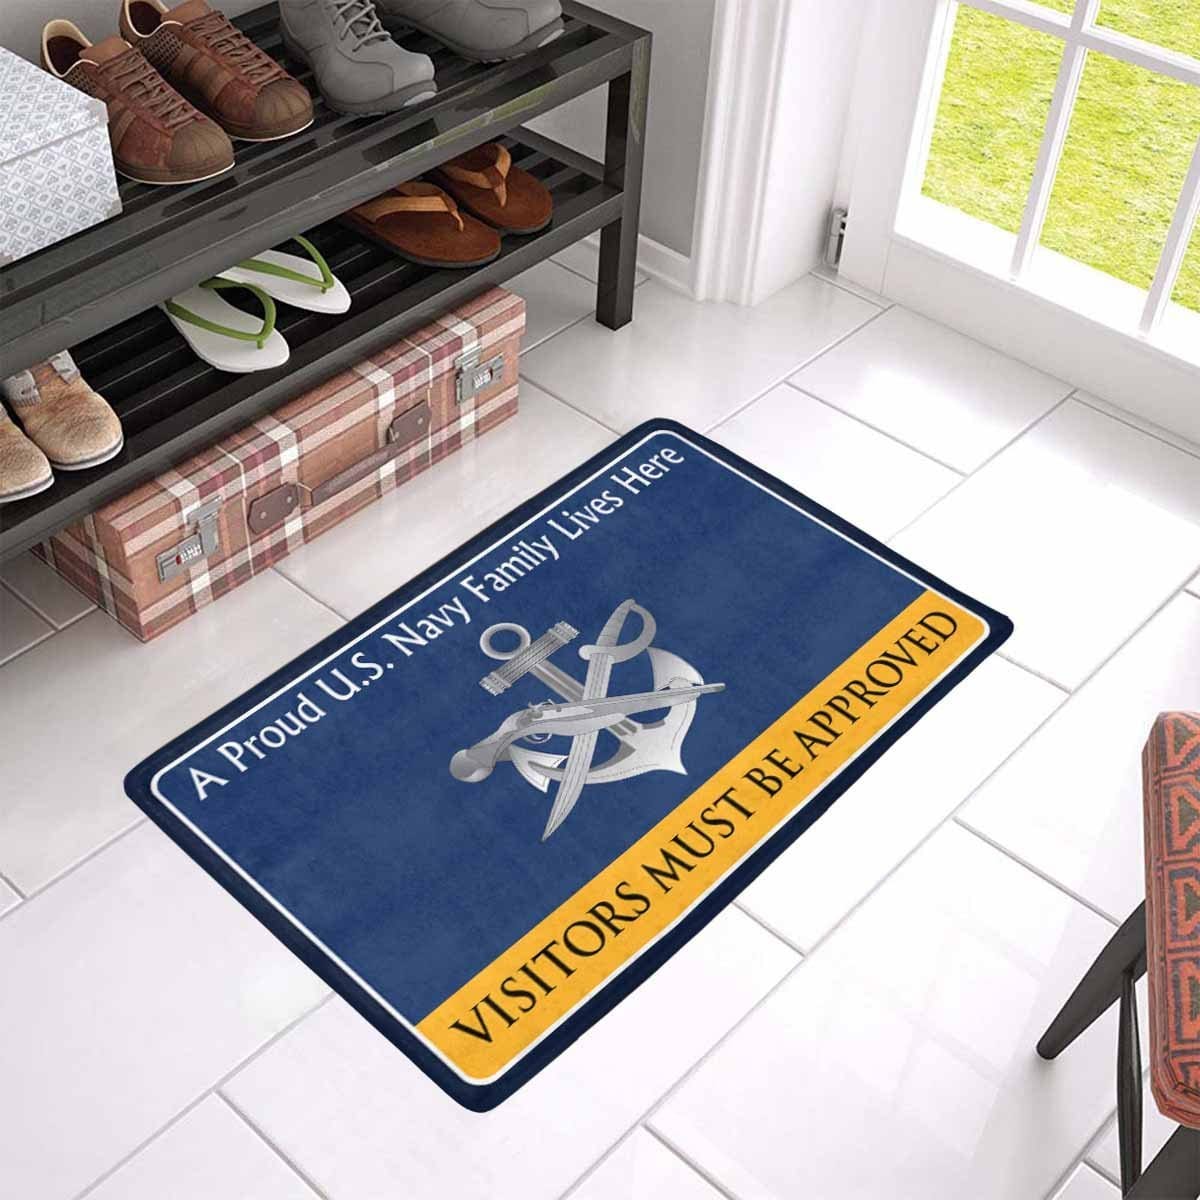 U.S Navy Special Warfare Boat Operator Navy SB Family Doormat - Visitors must be approved (23,6 inches x 15,7 inches)-Doormat-Navy-Rate-Veterans Nation